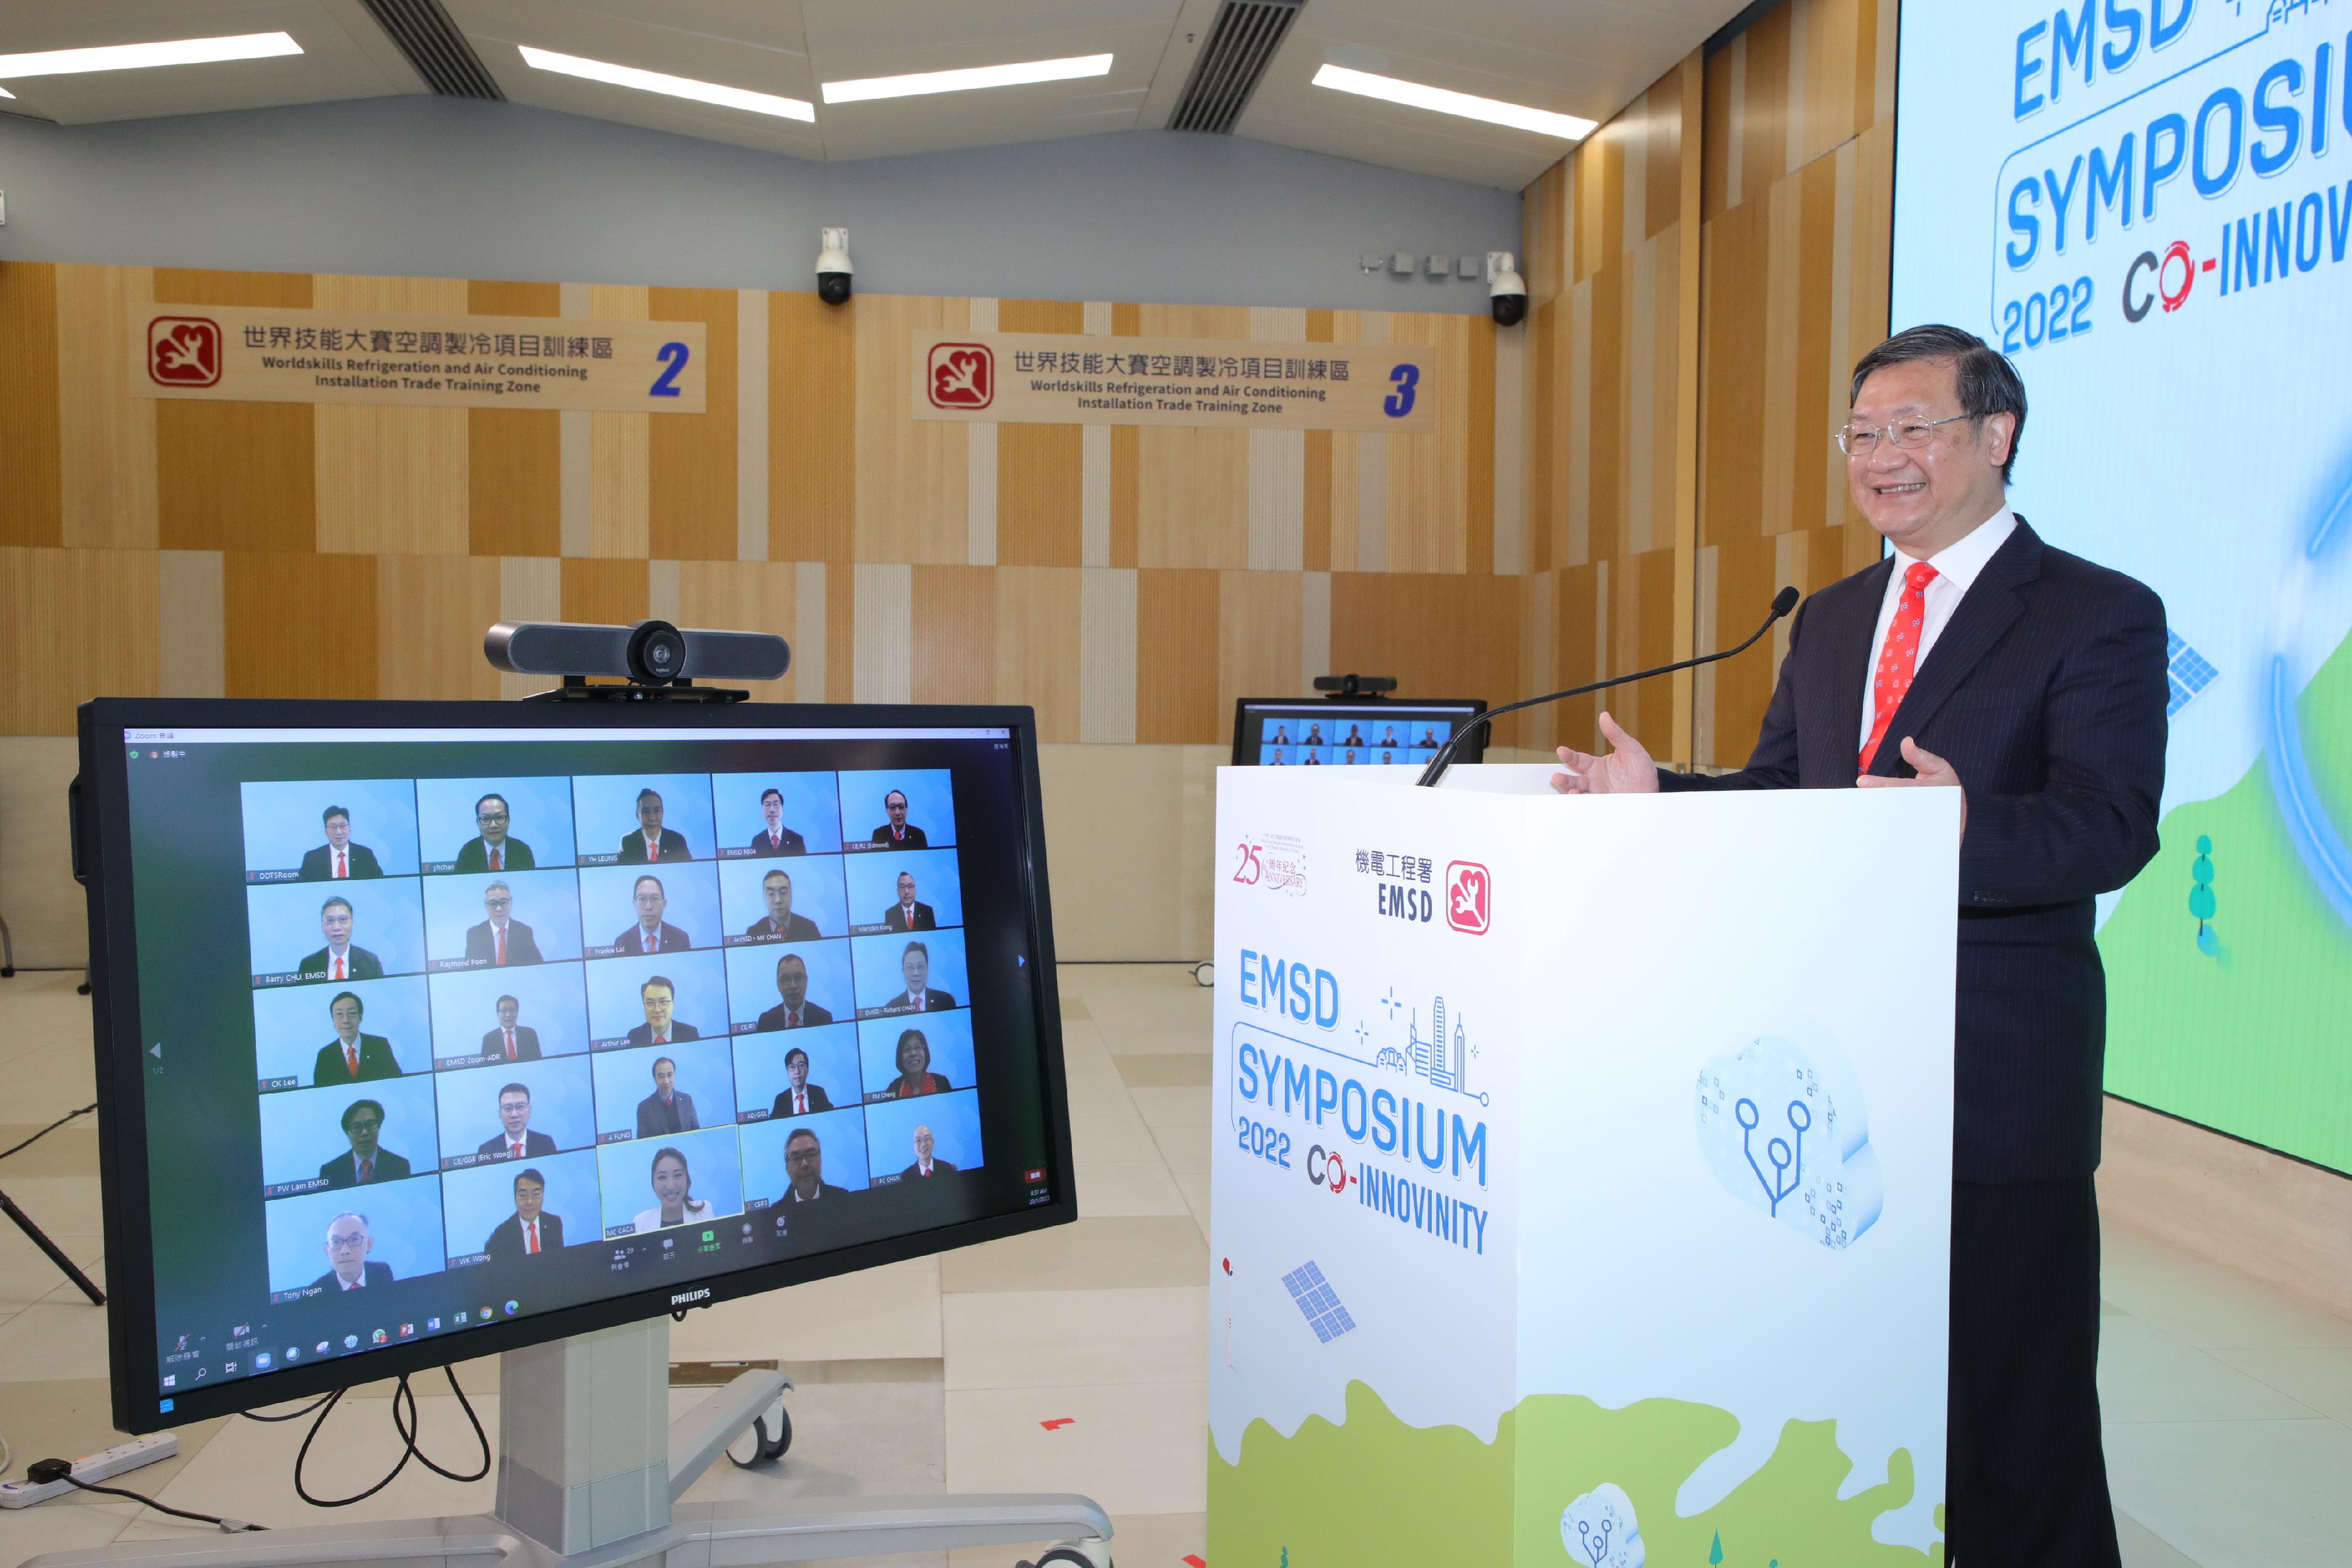 The Electrical and Mechanical Services Department (EMSD) held the EMSD Symposium 2022 via video conferencing today (January 20). Photo shows the Director of Electrical and Mechanical Services, Mr Eric Pang, delivering a welcoming speech at the symposium.